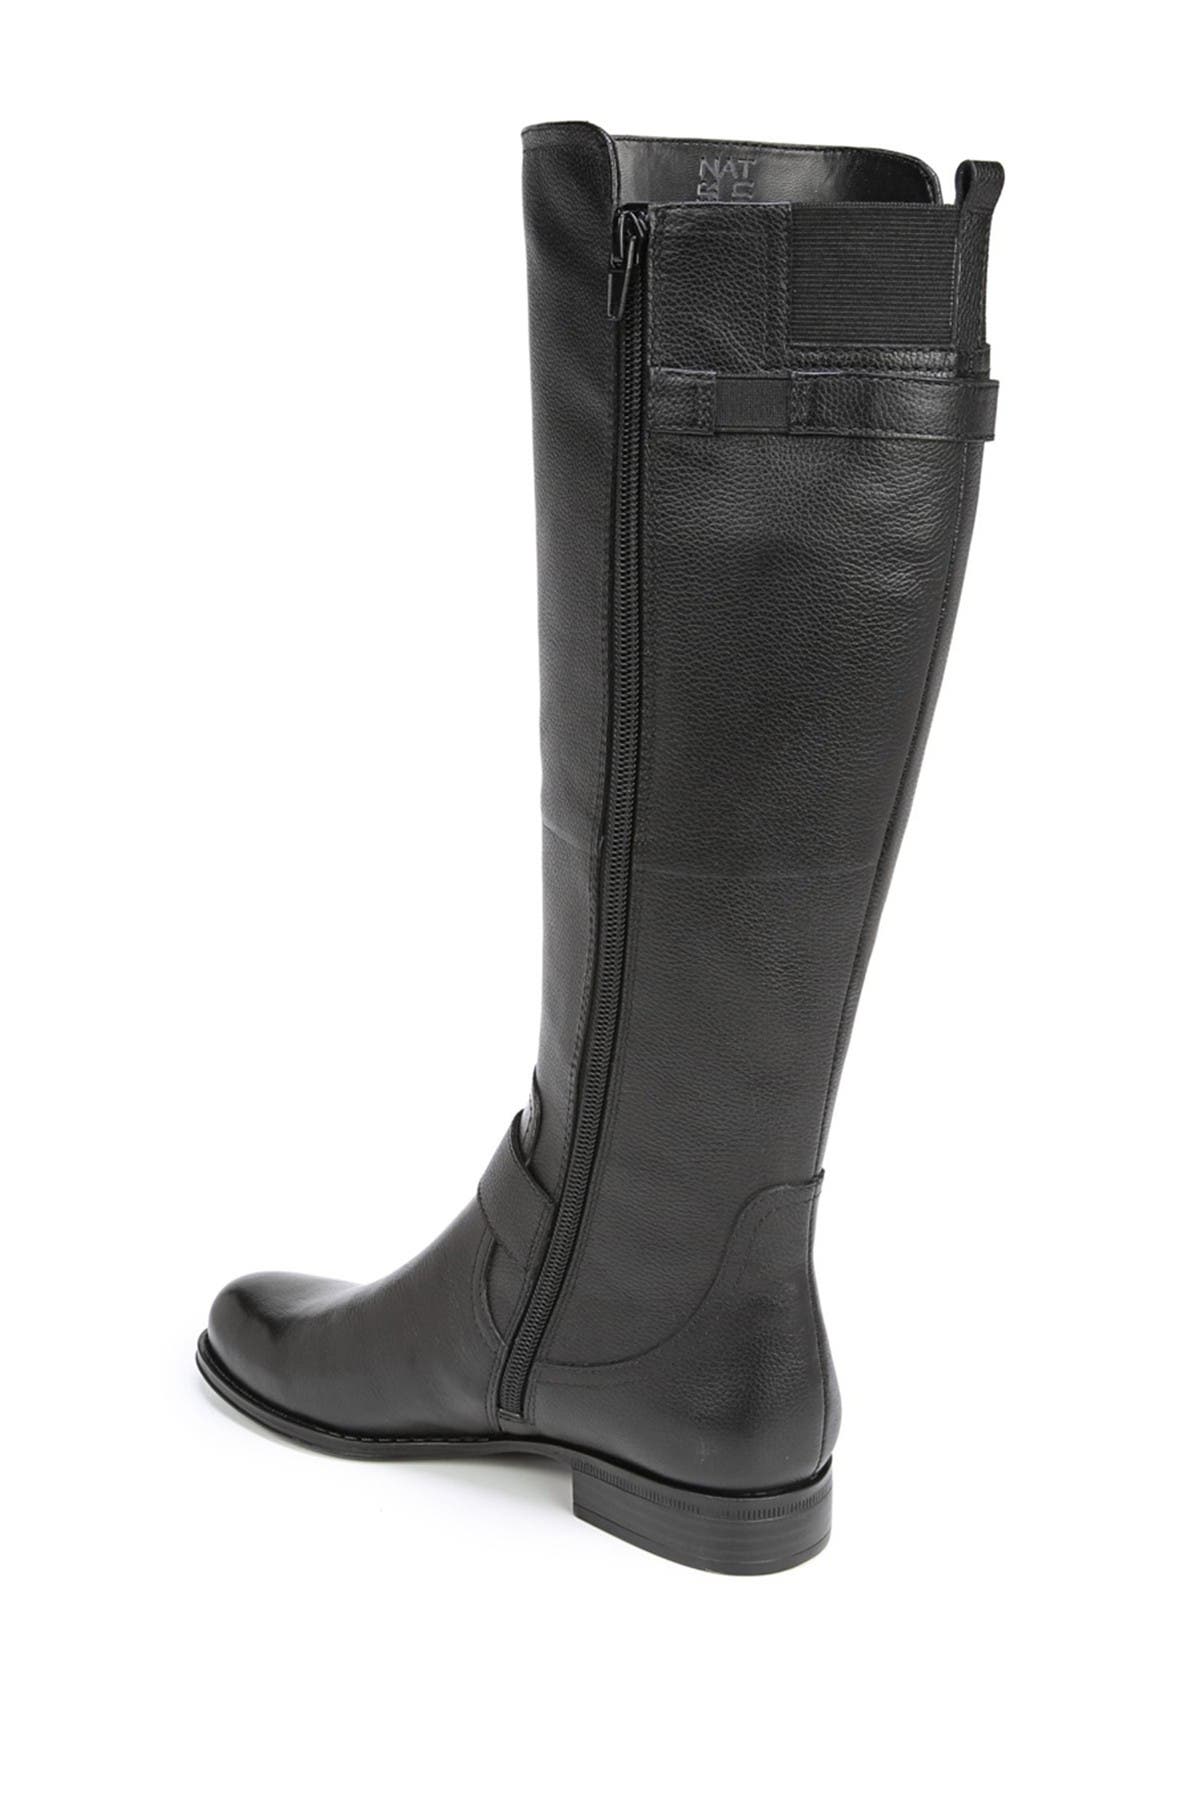 naturalizer tall leather boots